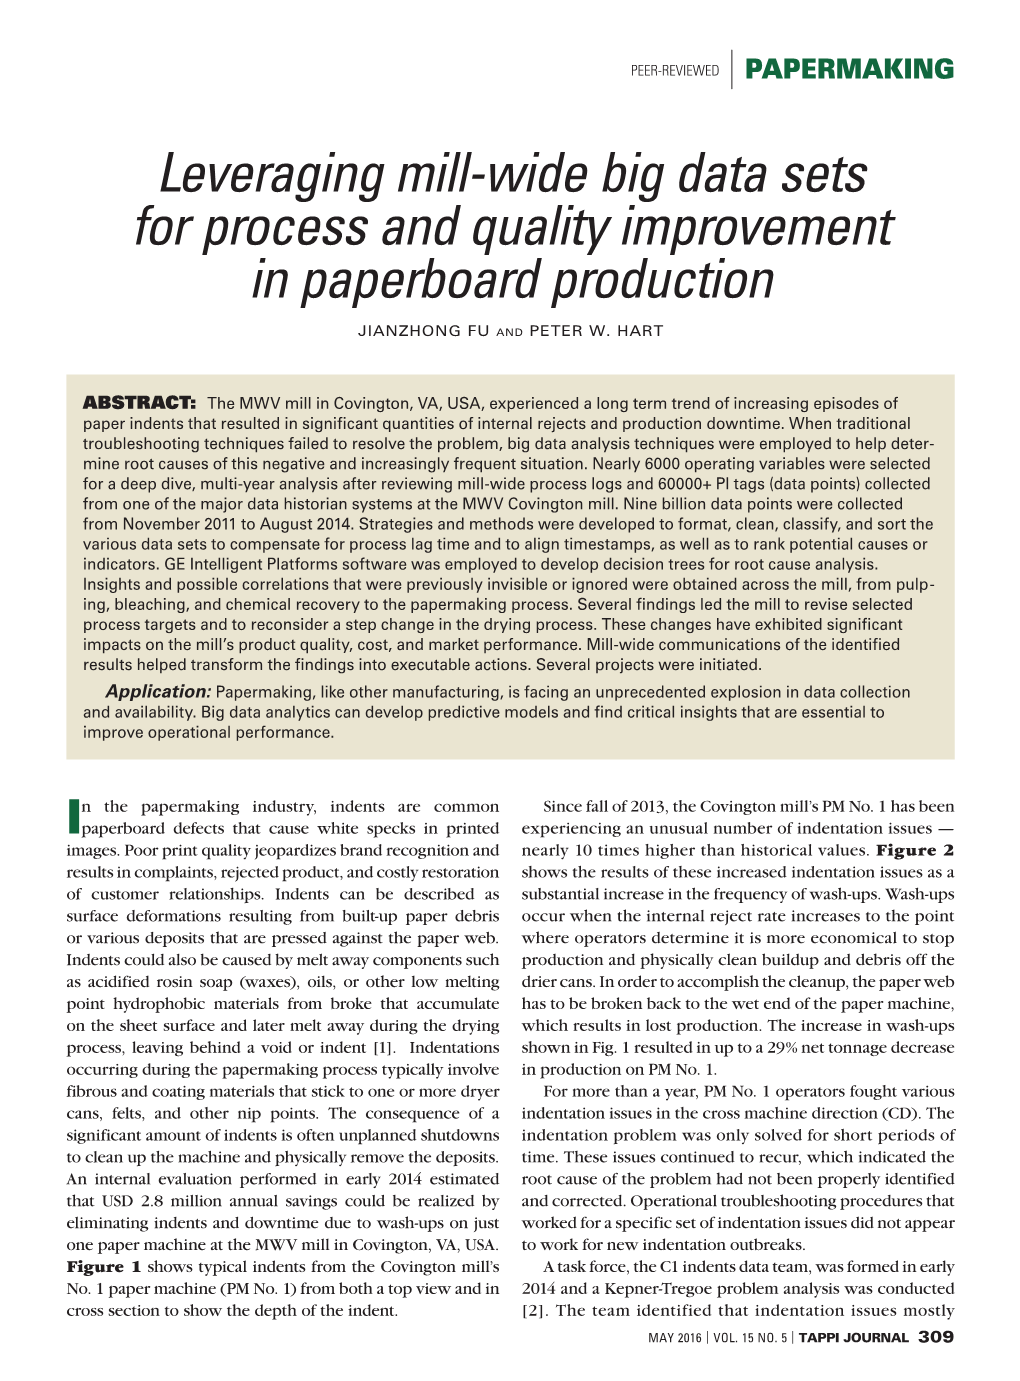 Leveraging Mill-Wide Big Data Sets for Process and Quality Improvement in Paperboard Production